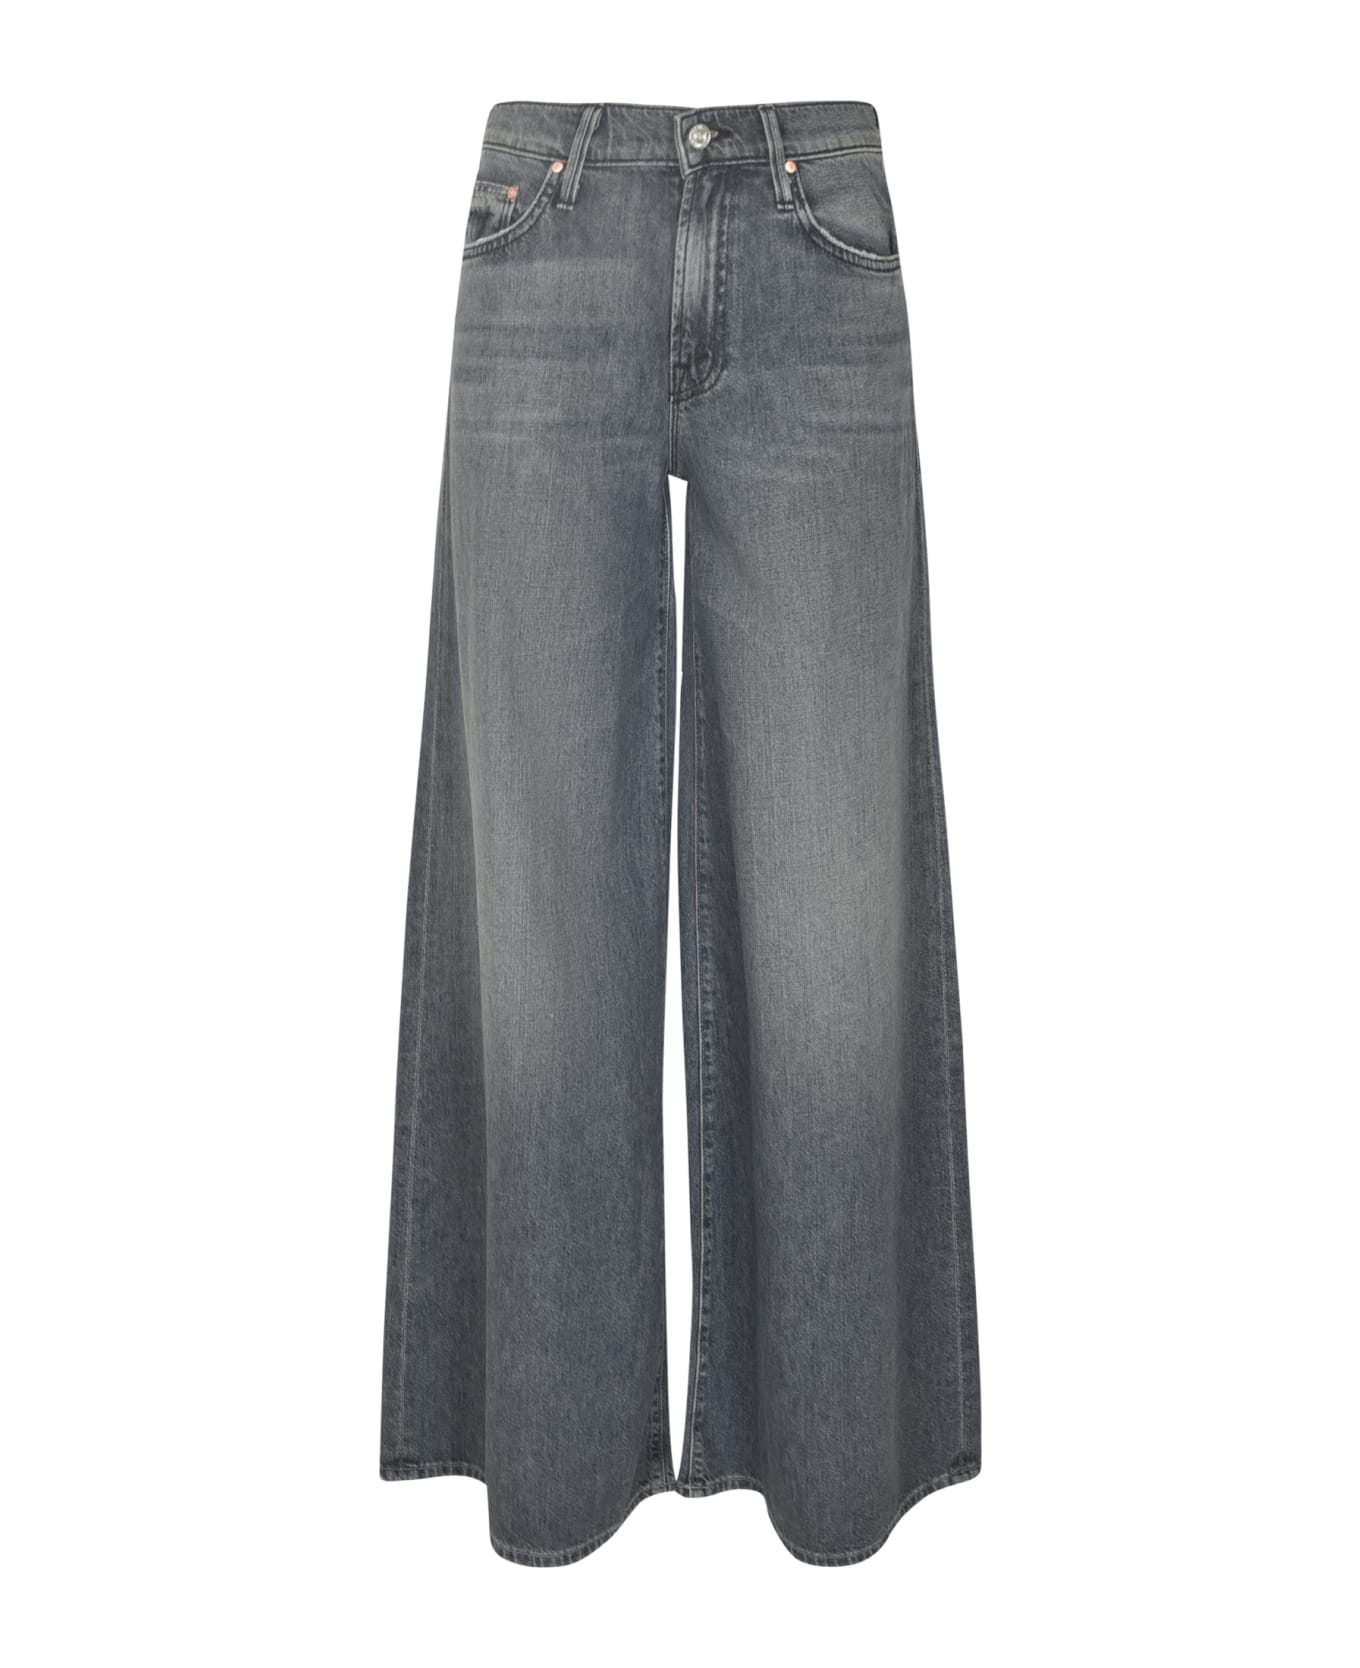 Mother Flared Leg Jeans - Grey